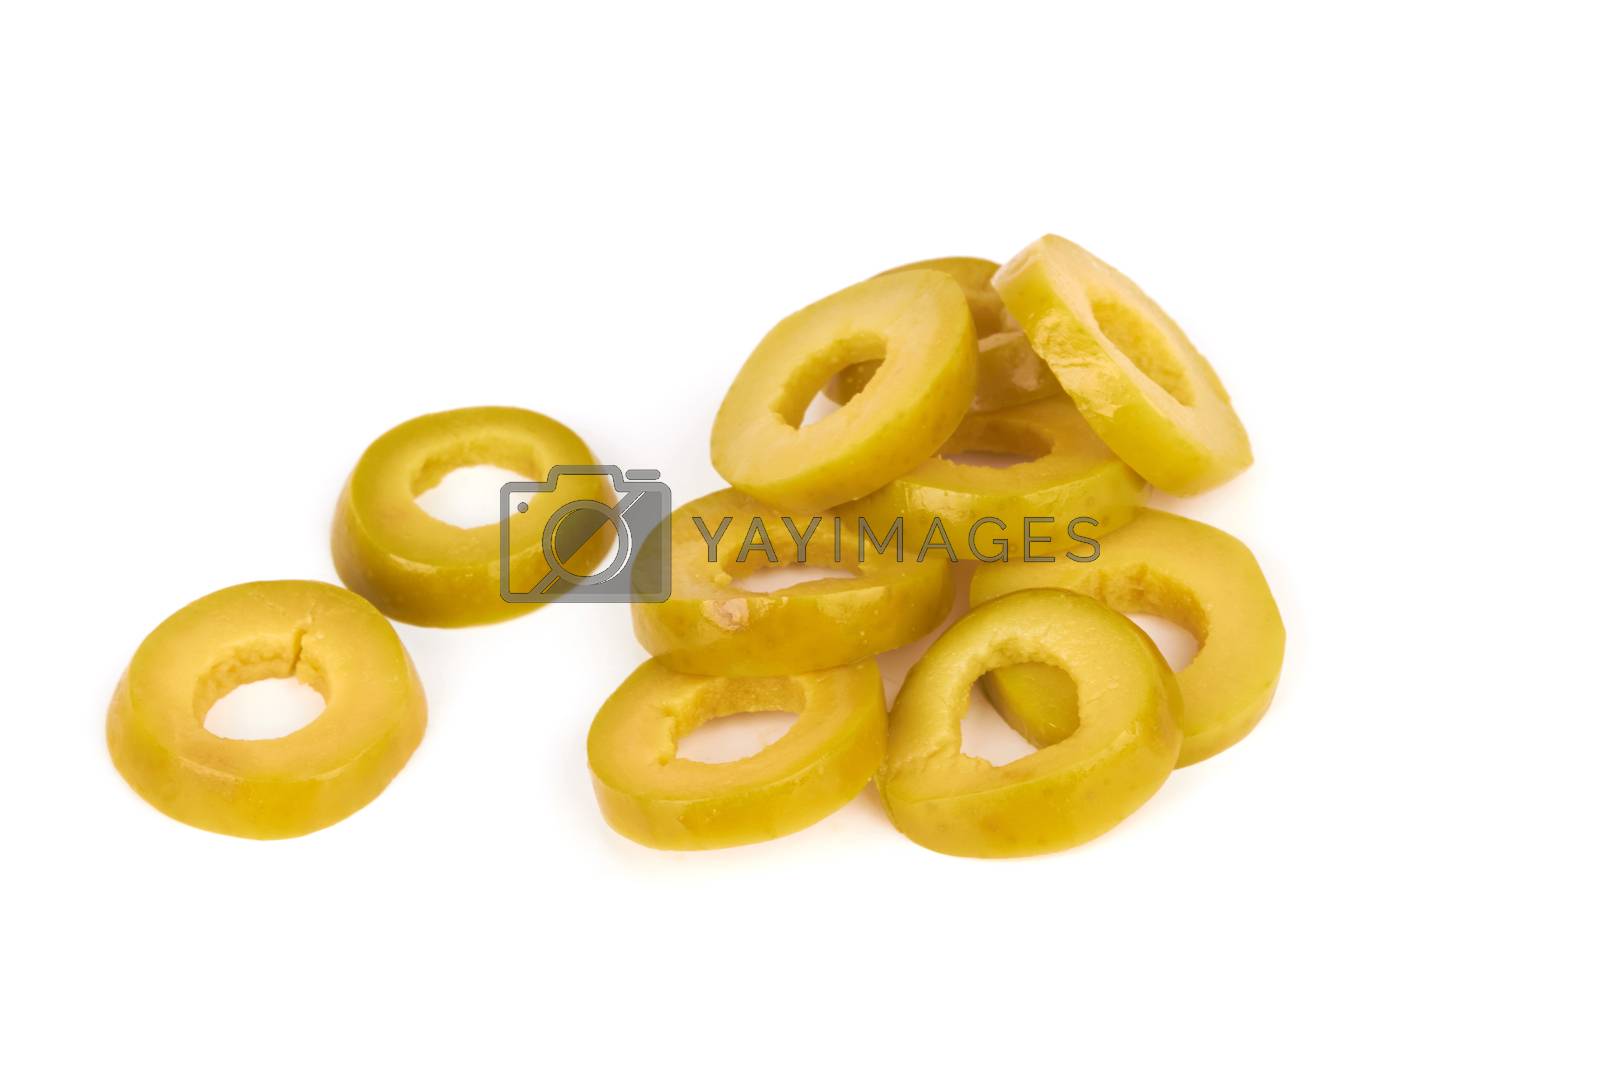 Royalty free image of green olives by pioneer111